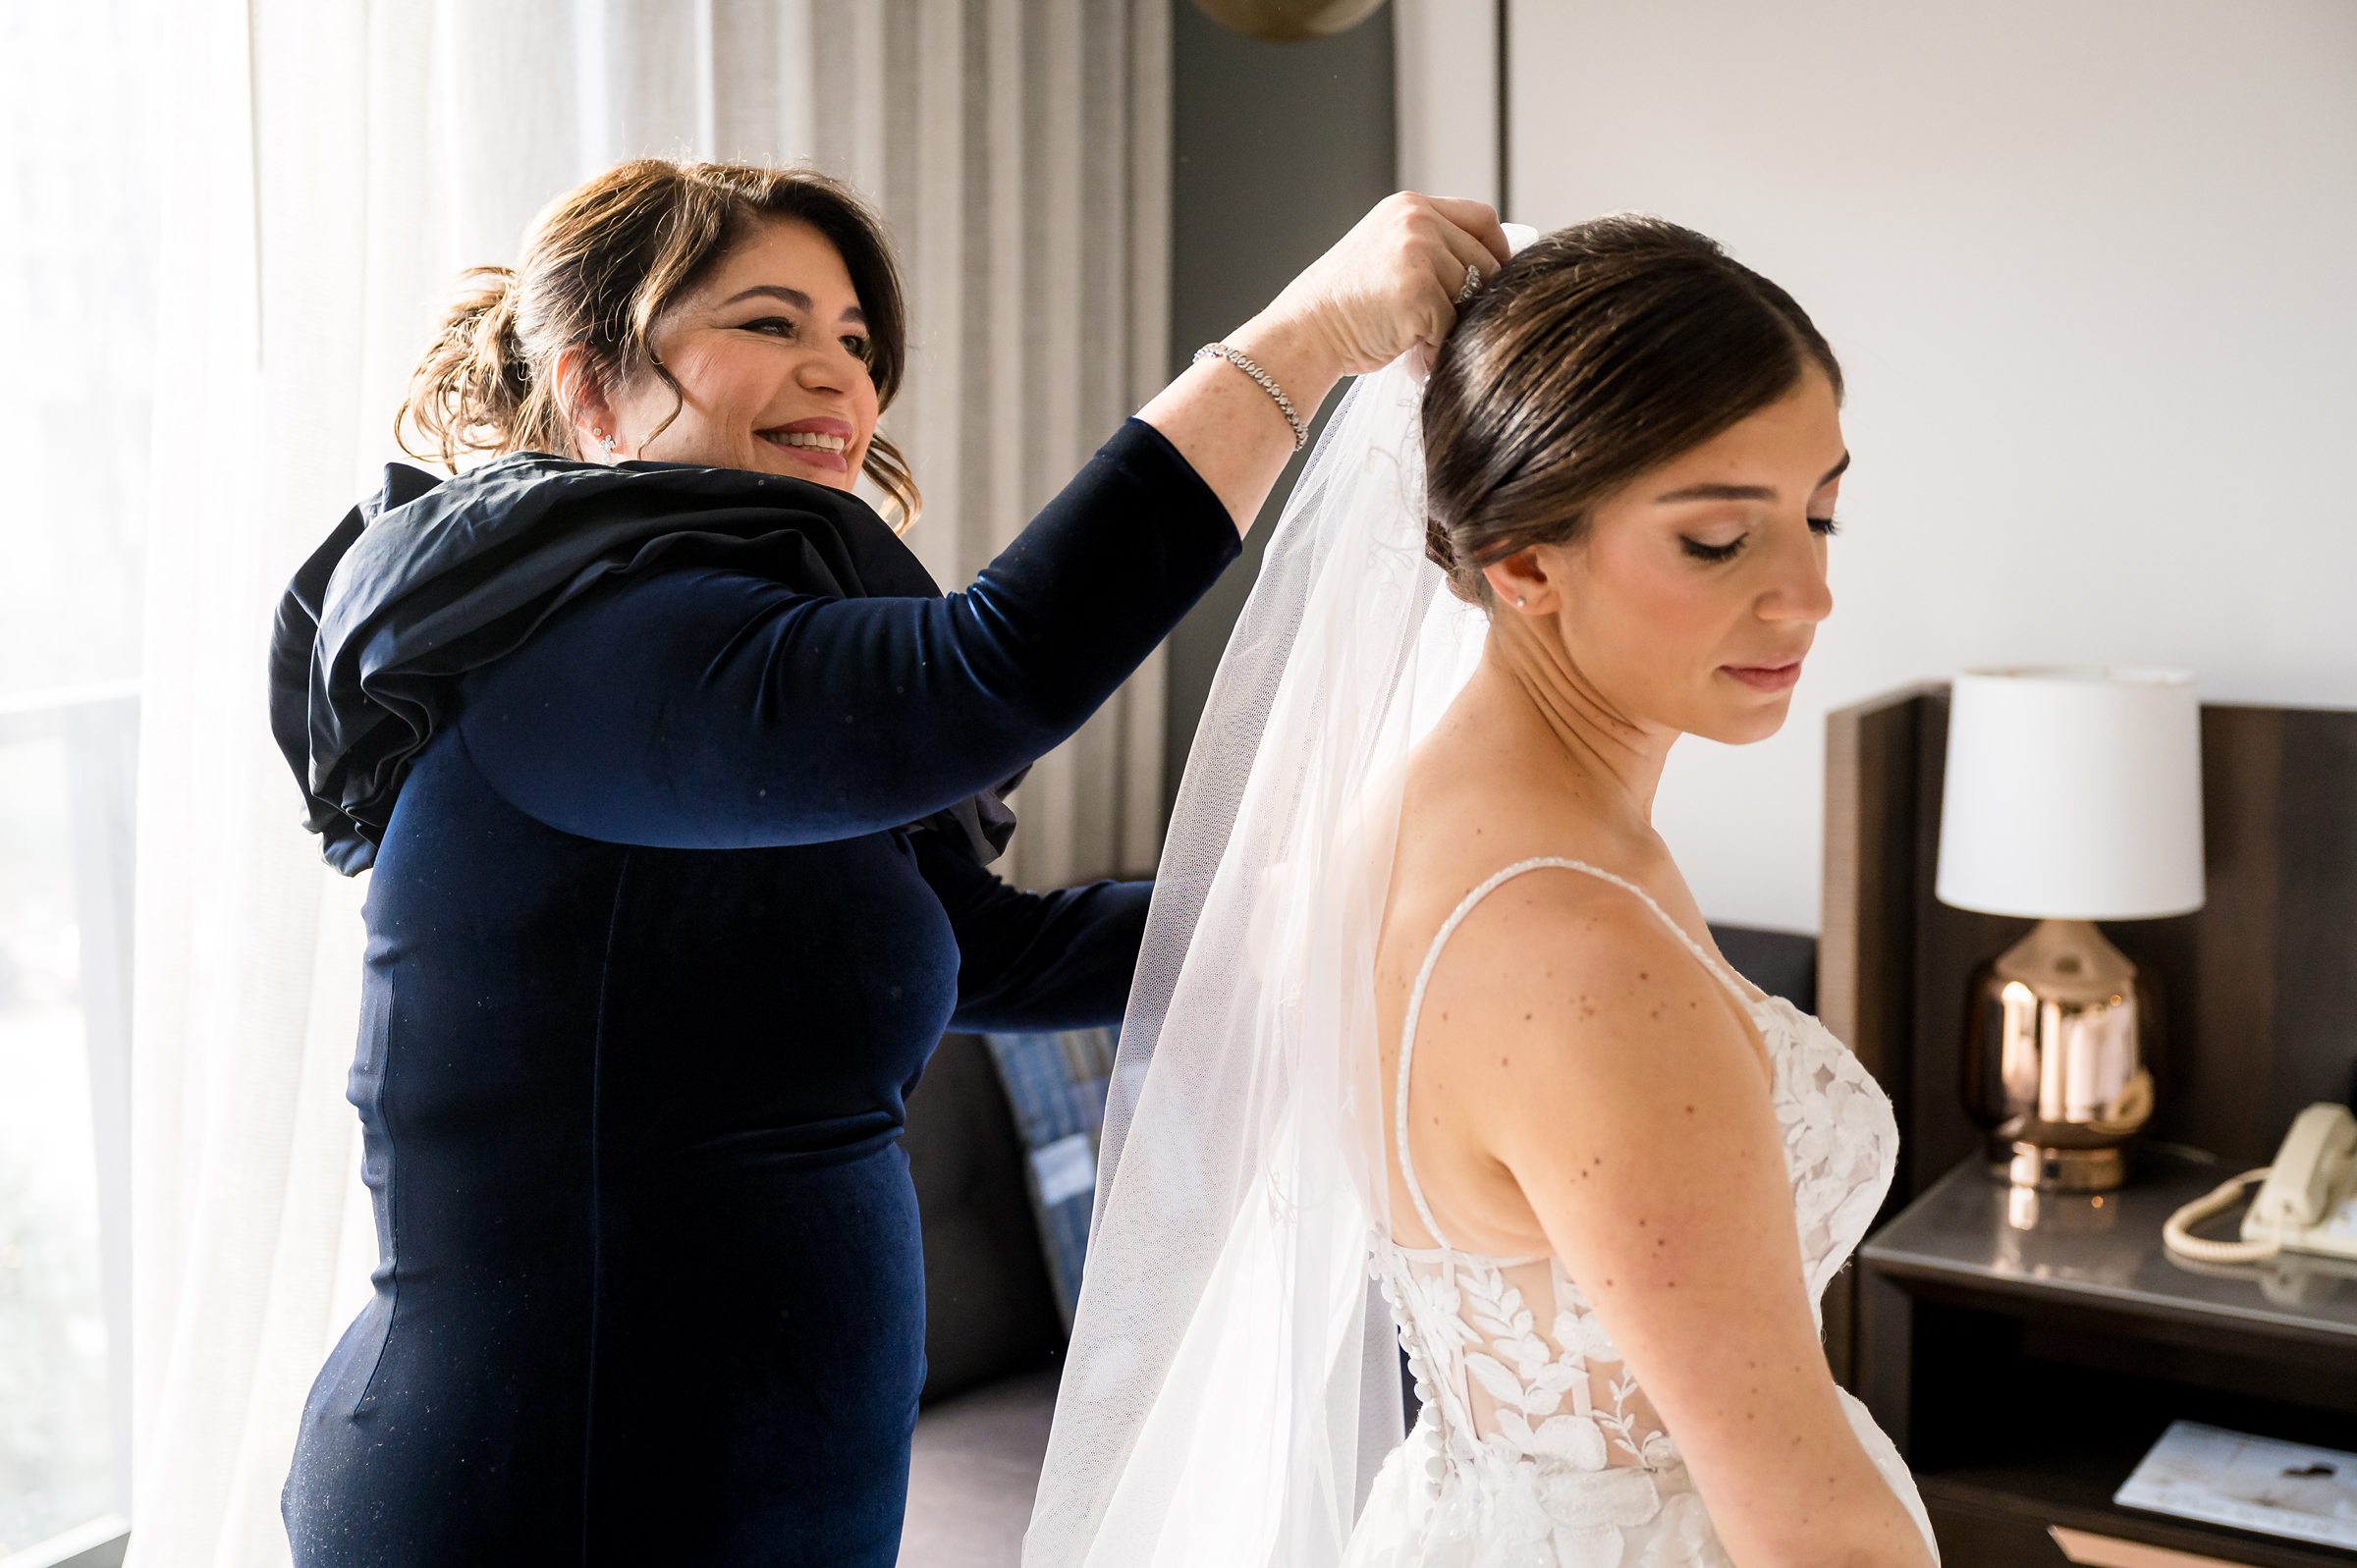 A bride preparing for her Lilah Events wedding in a hotel room.